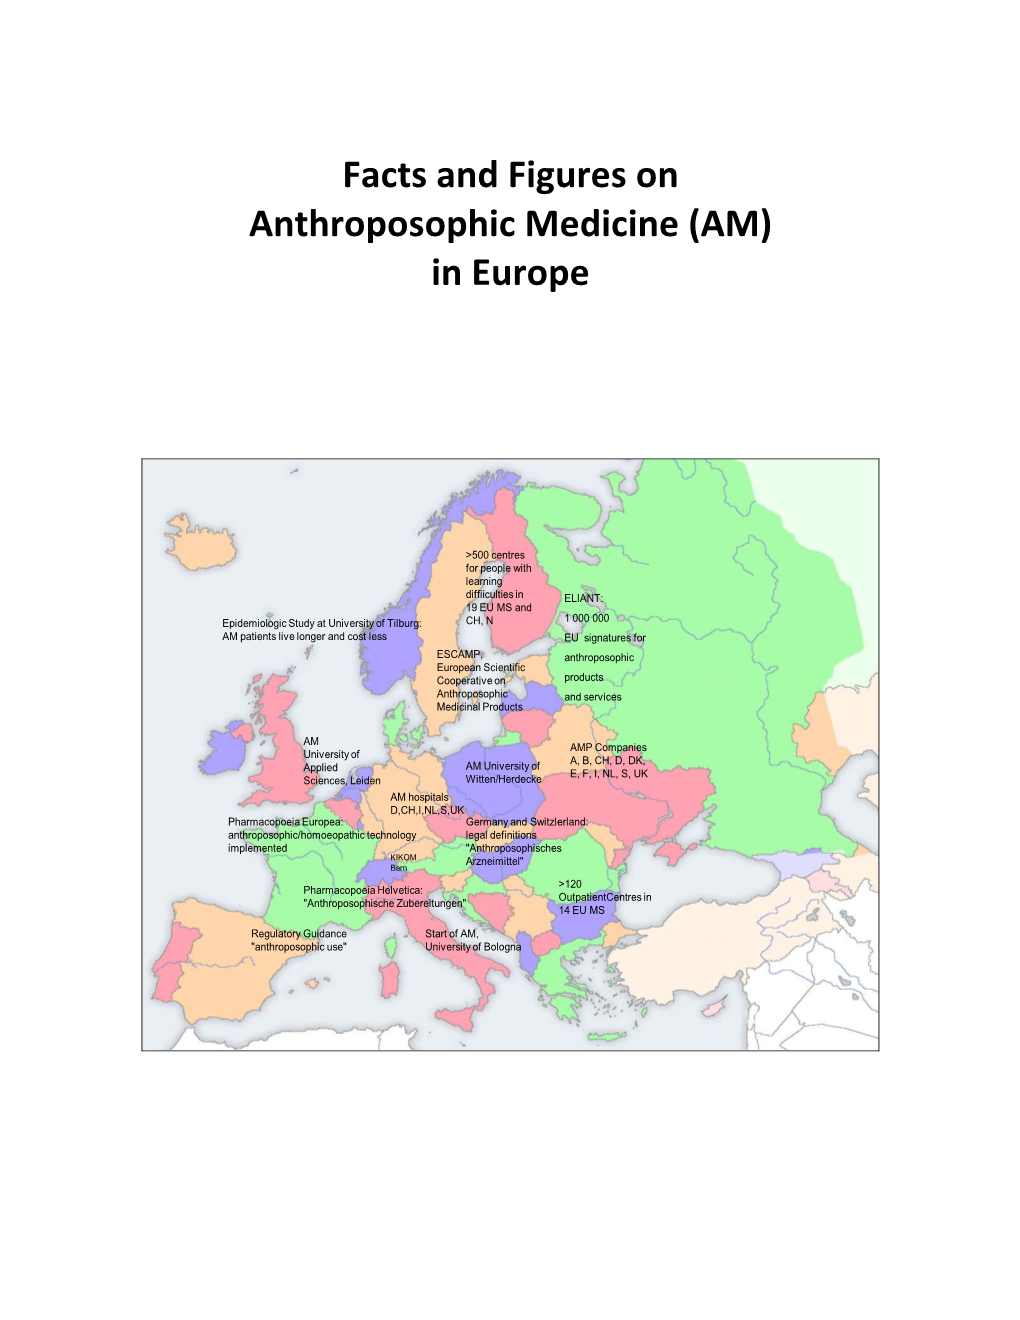 Facts and Figures on Anthroposophic Medicine (AM) in Europe